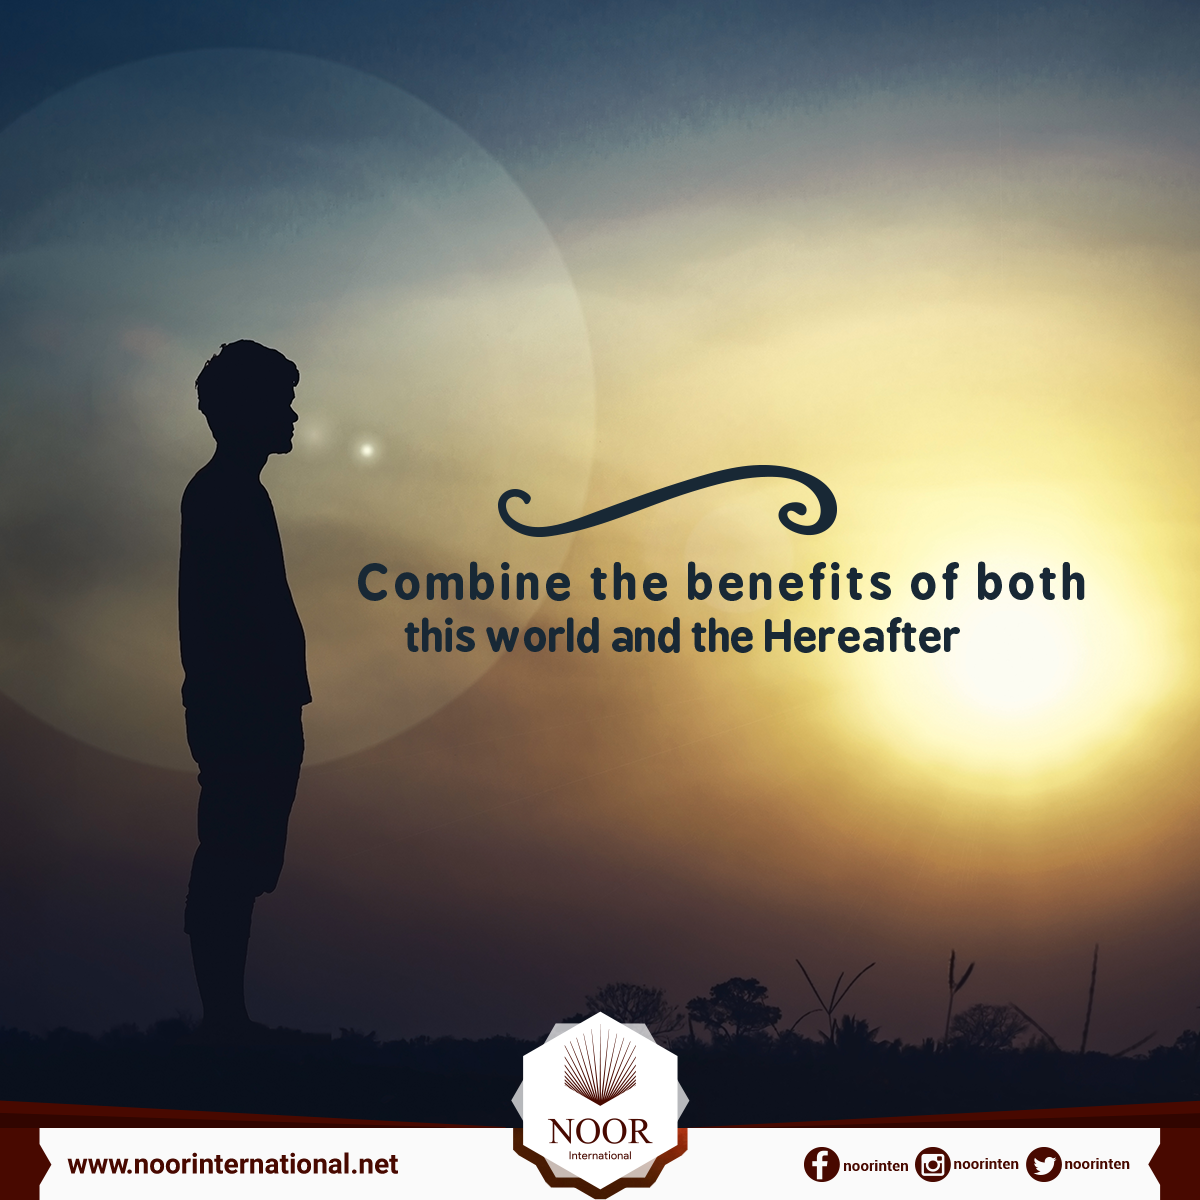 Combine the benefits of both this world and the Hereafter